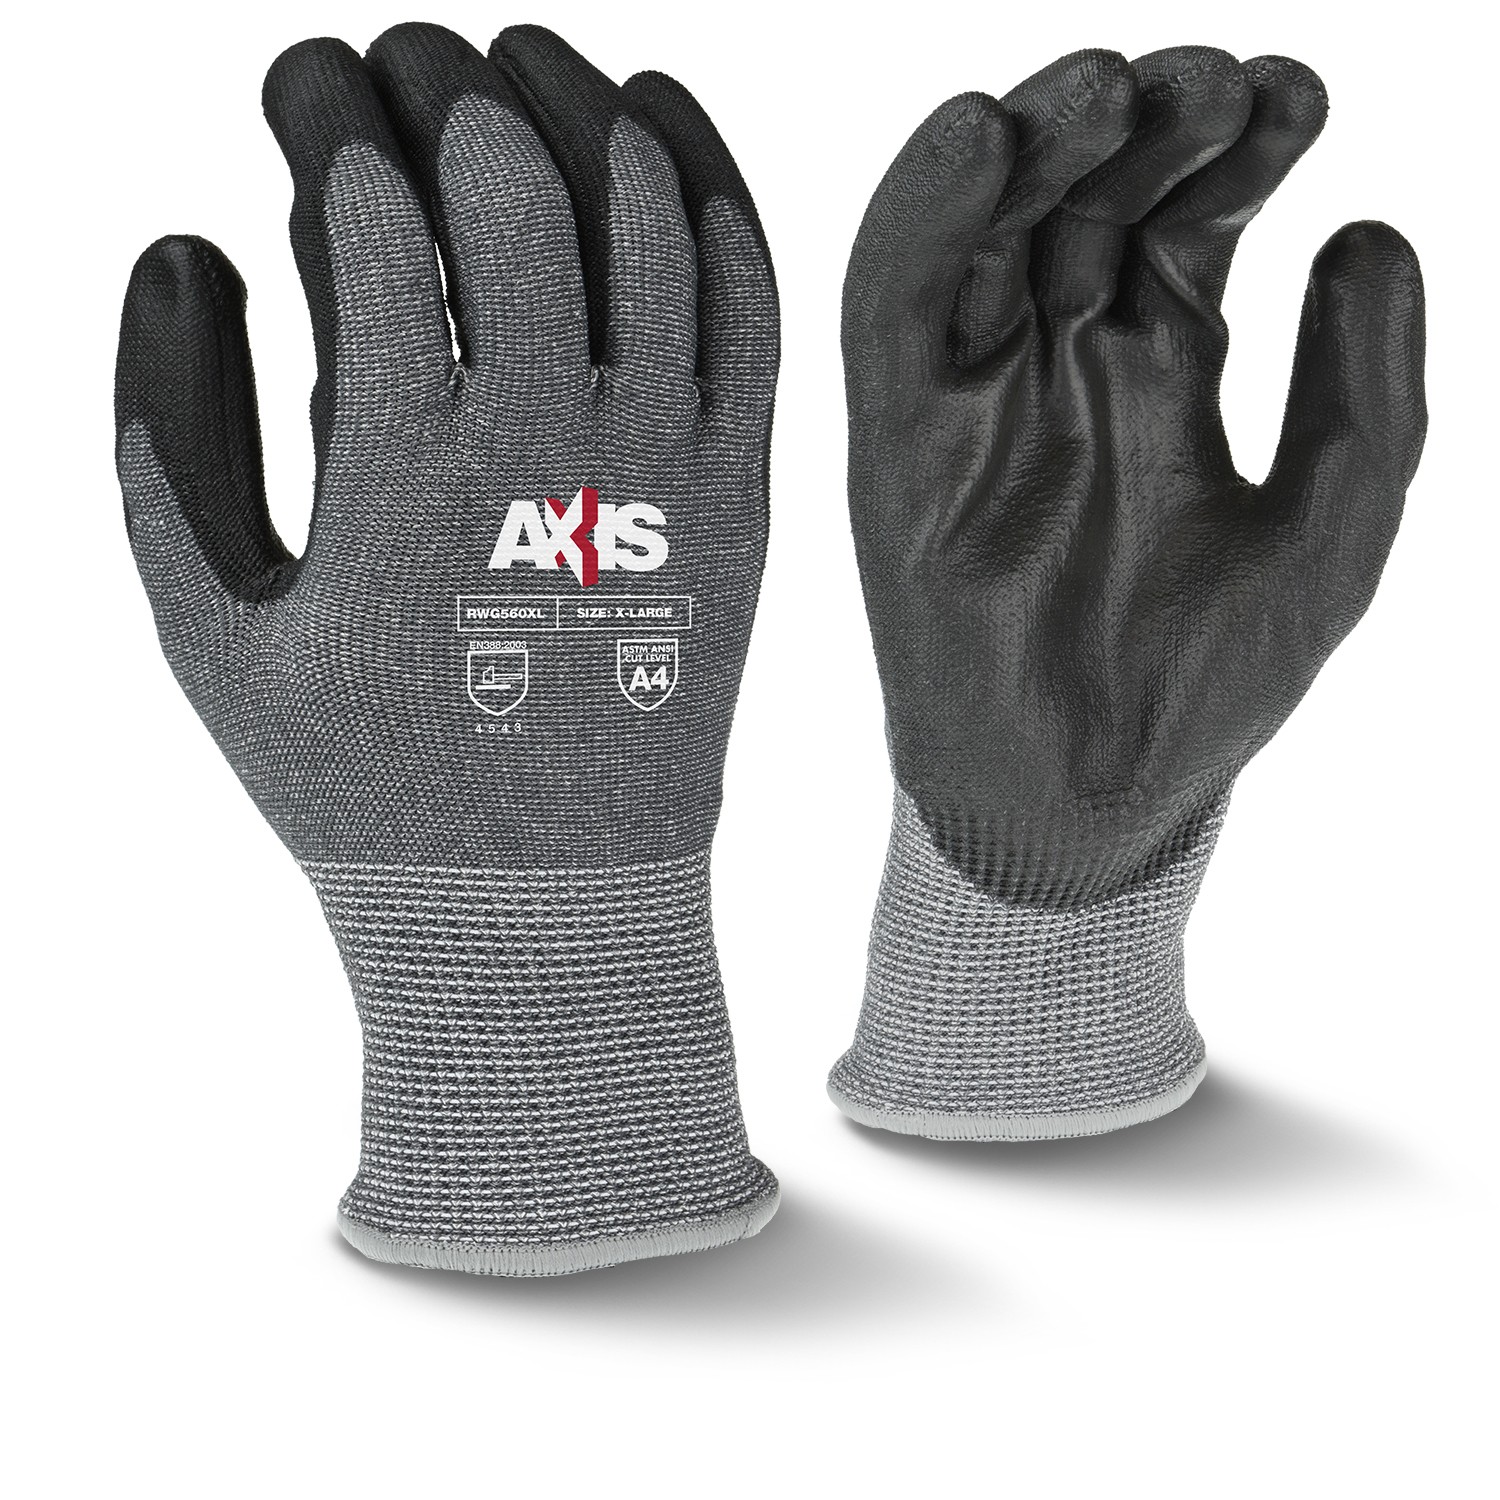 Axis™ Cut Protection Level A4 PU Coated Glove (#RWG560)